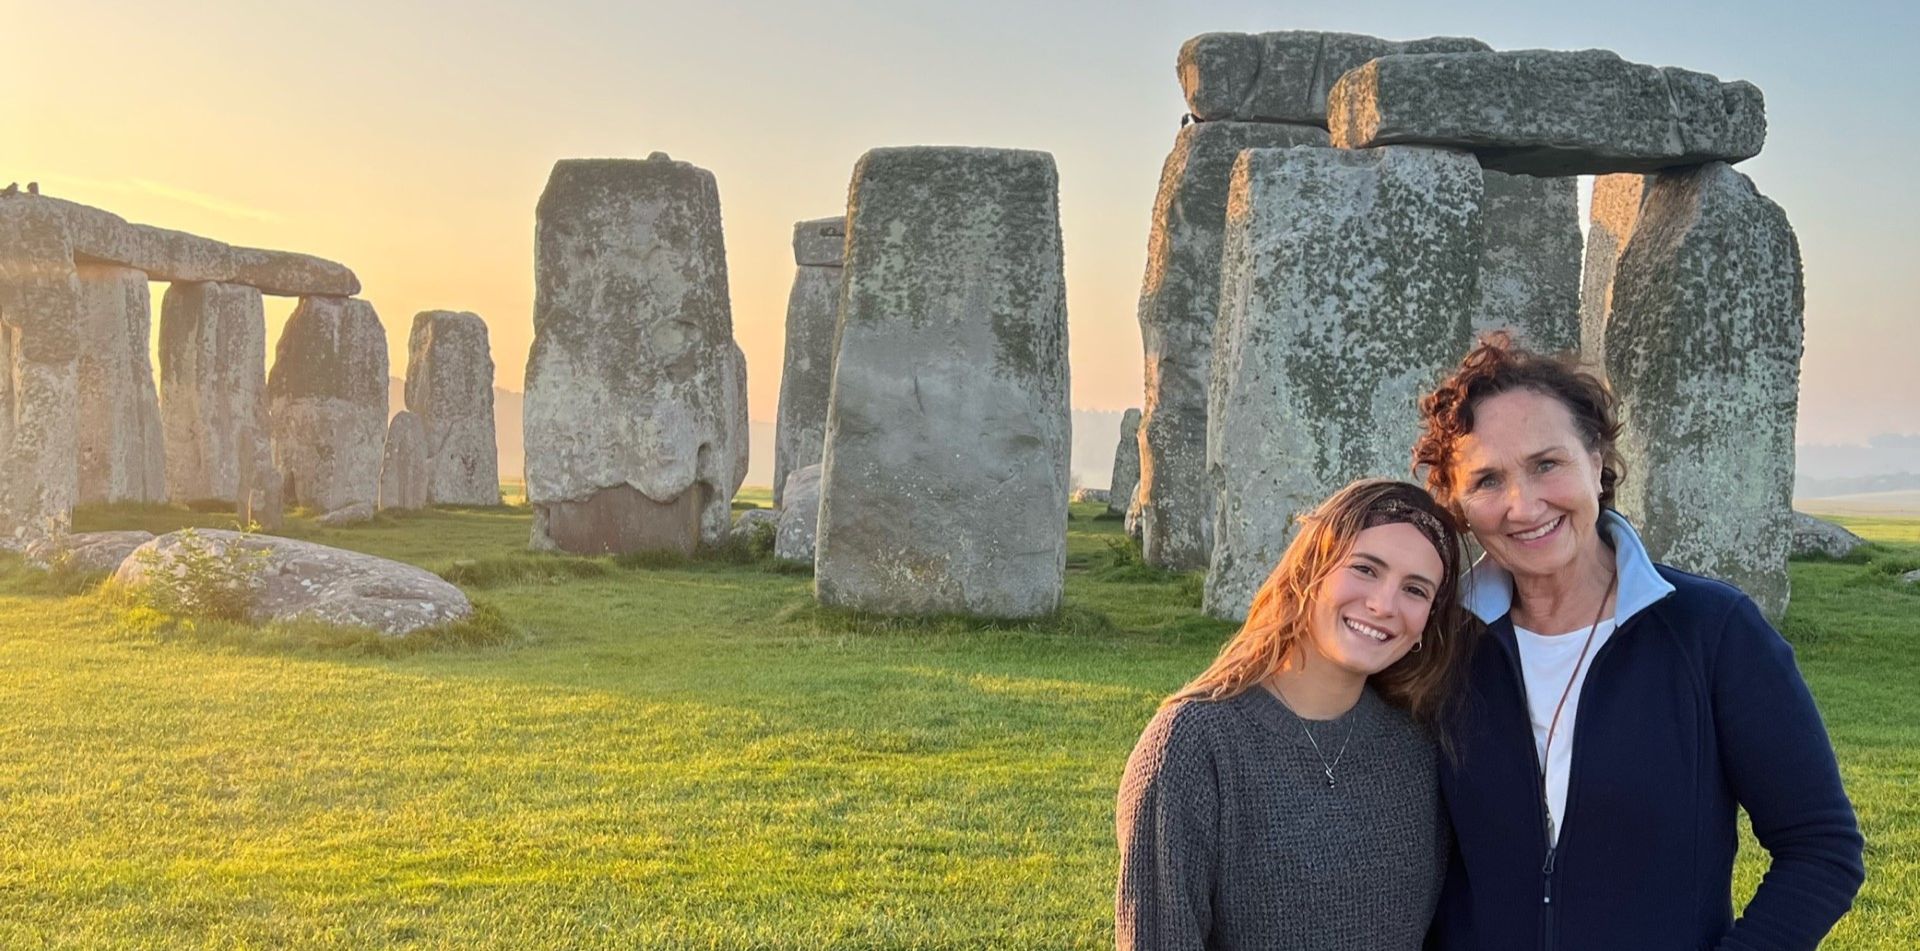 Get up close to Stonehenge during an 'only with Classic Journeys' private visit